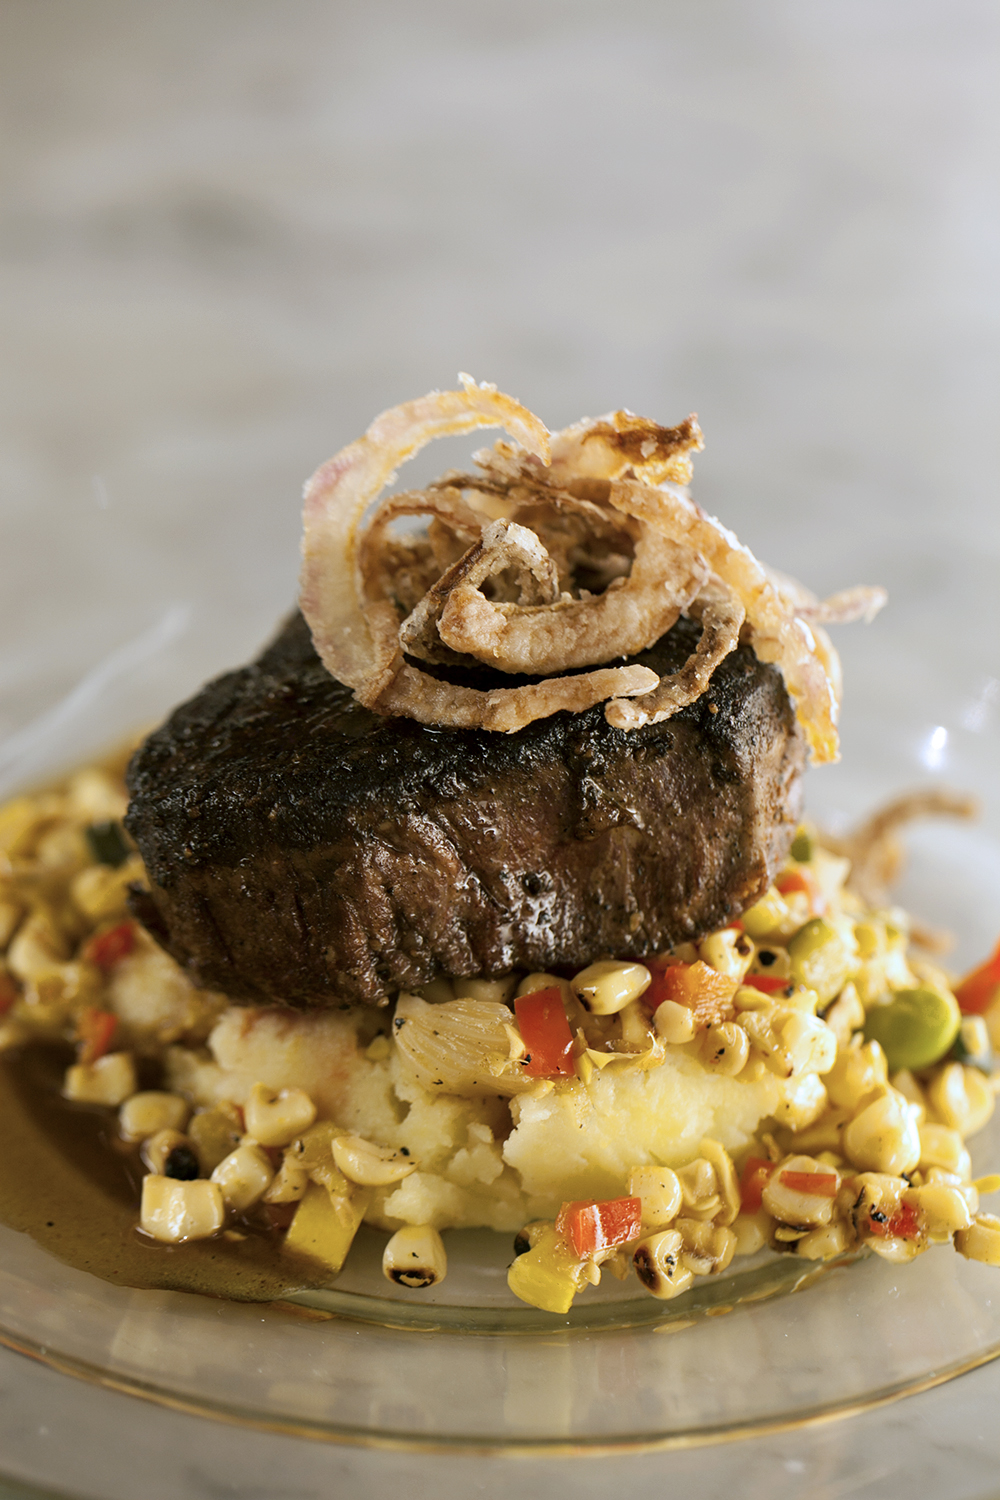 Blackened filet mignon with truffle mashed potatoes, charred corn and pepper succotash with bordelaise sauce